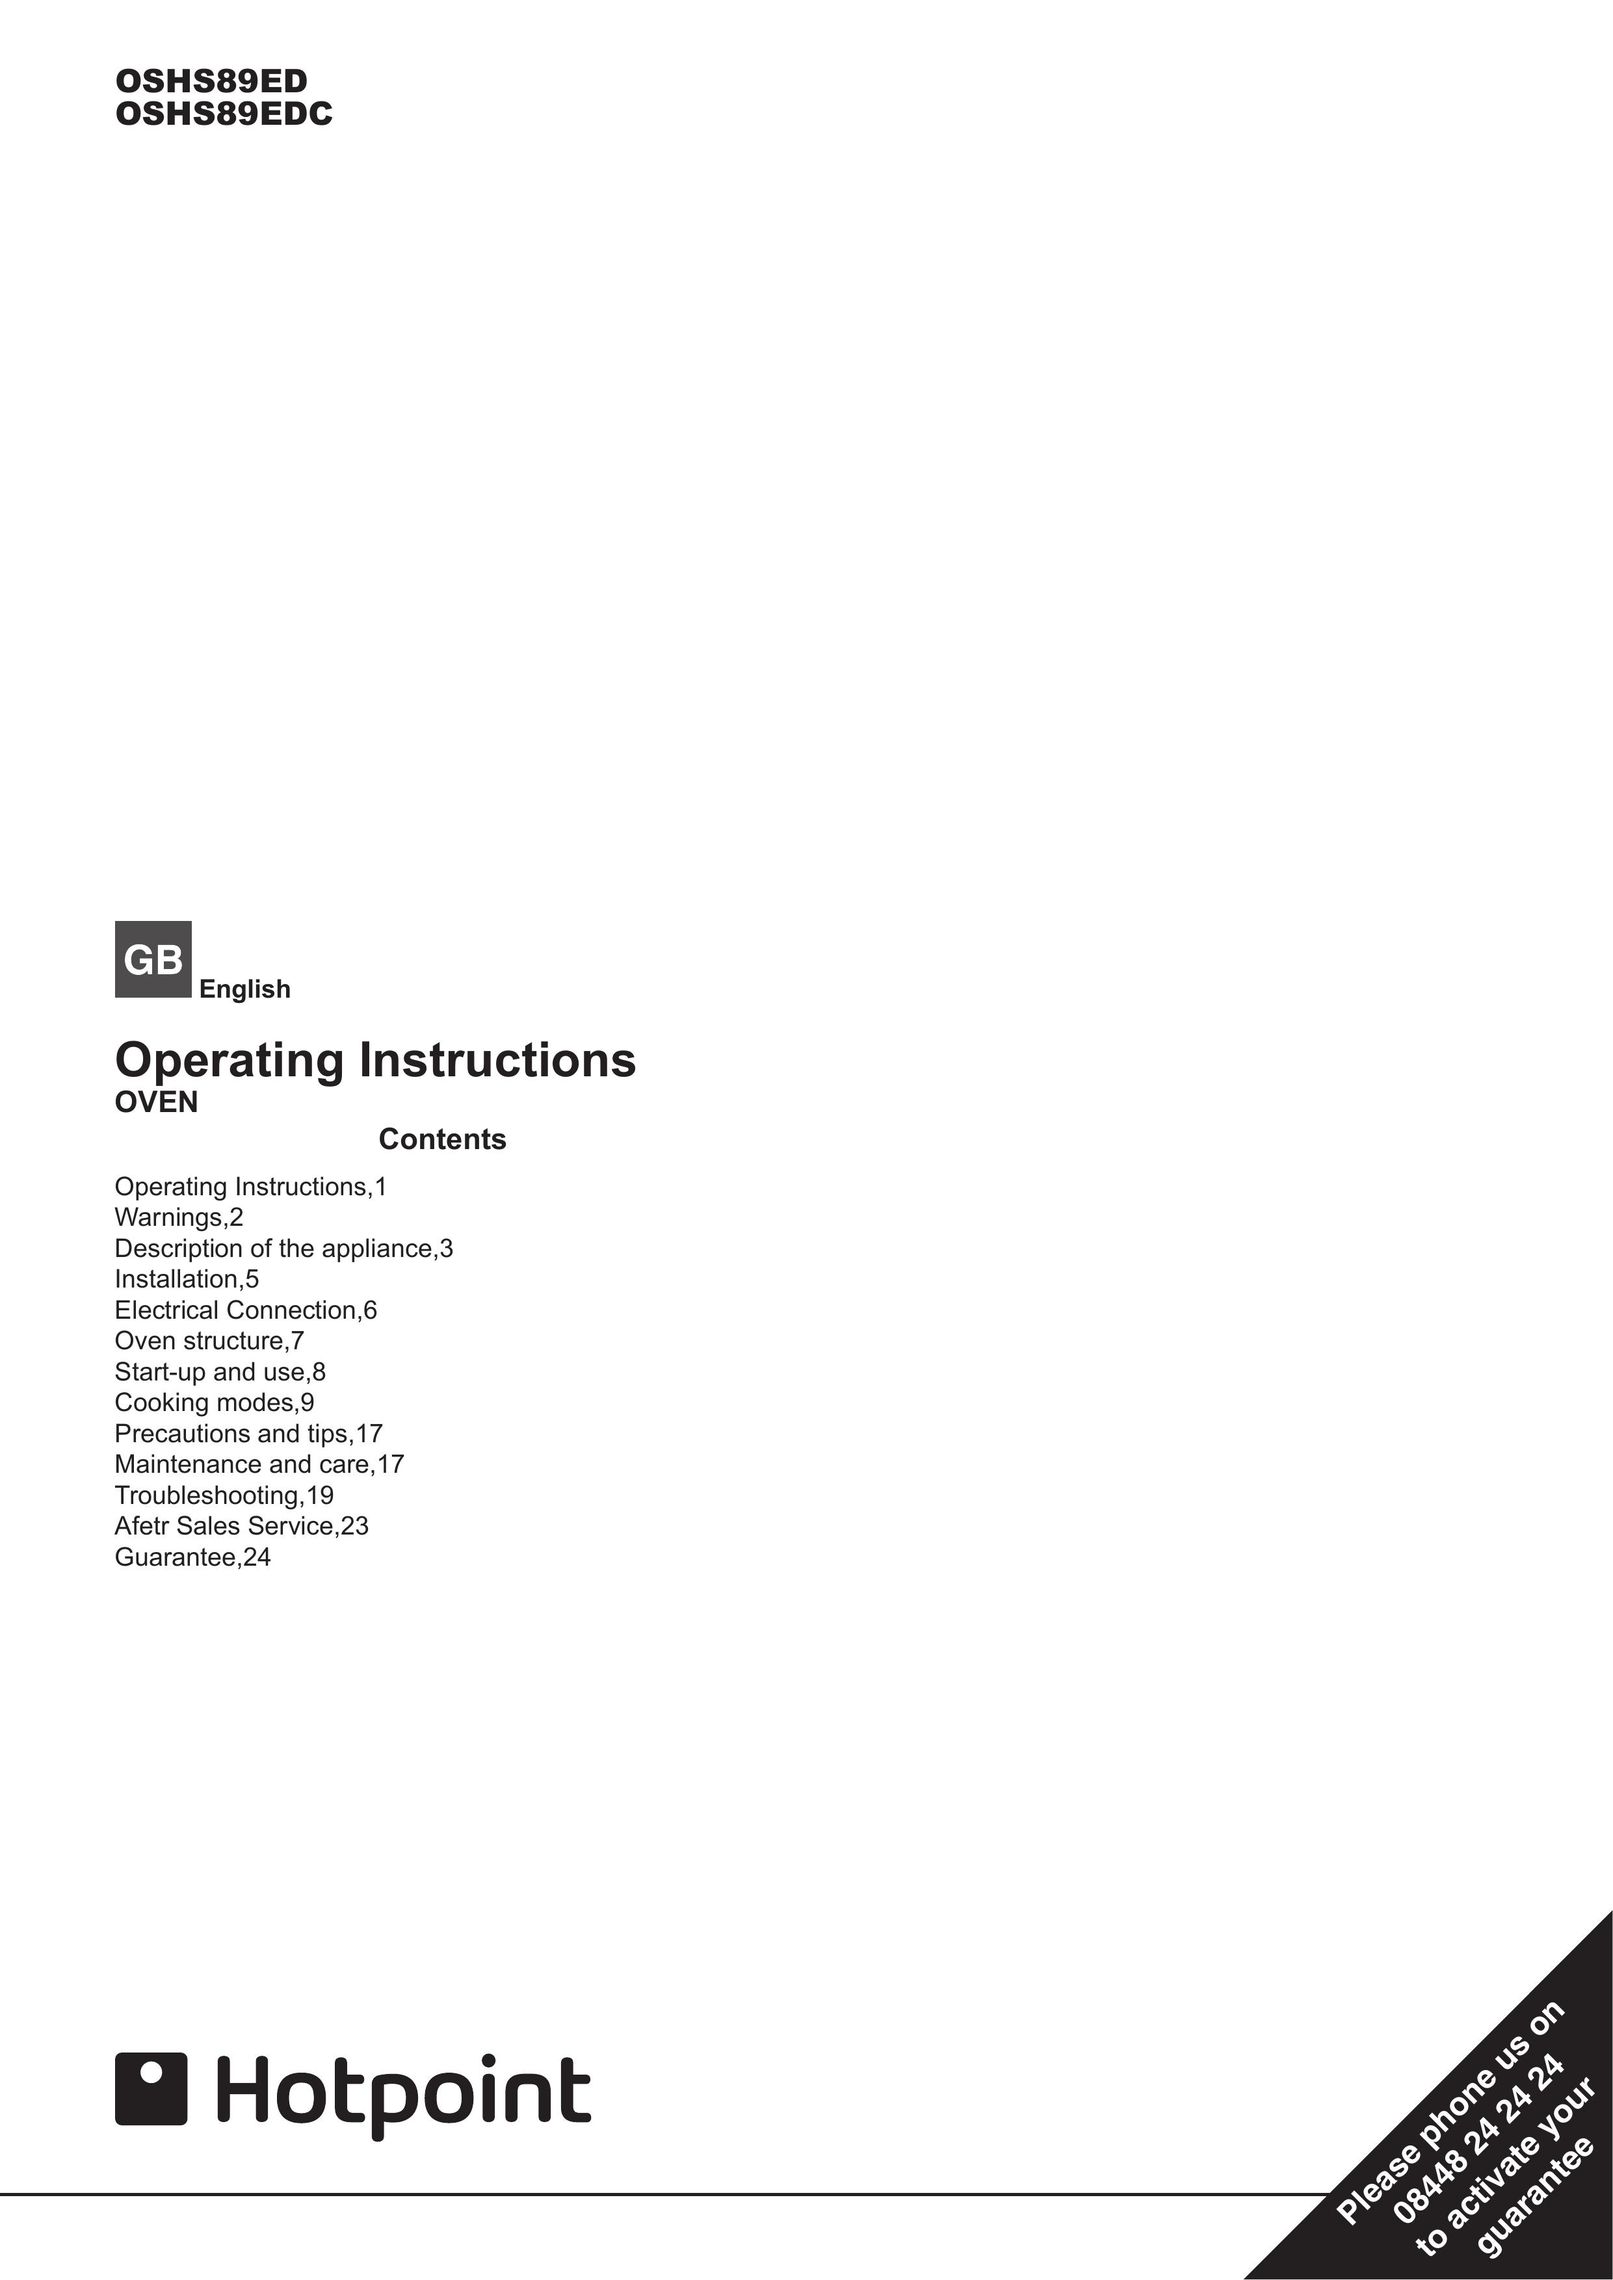 Hotpoint OSHS89ED Oven Accessories User Manual